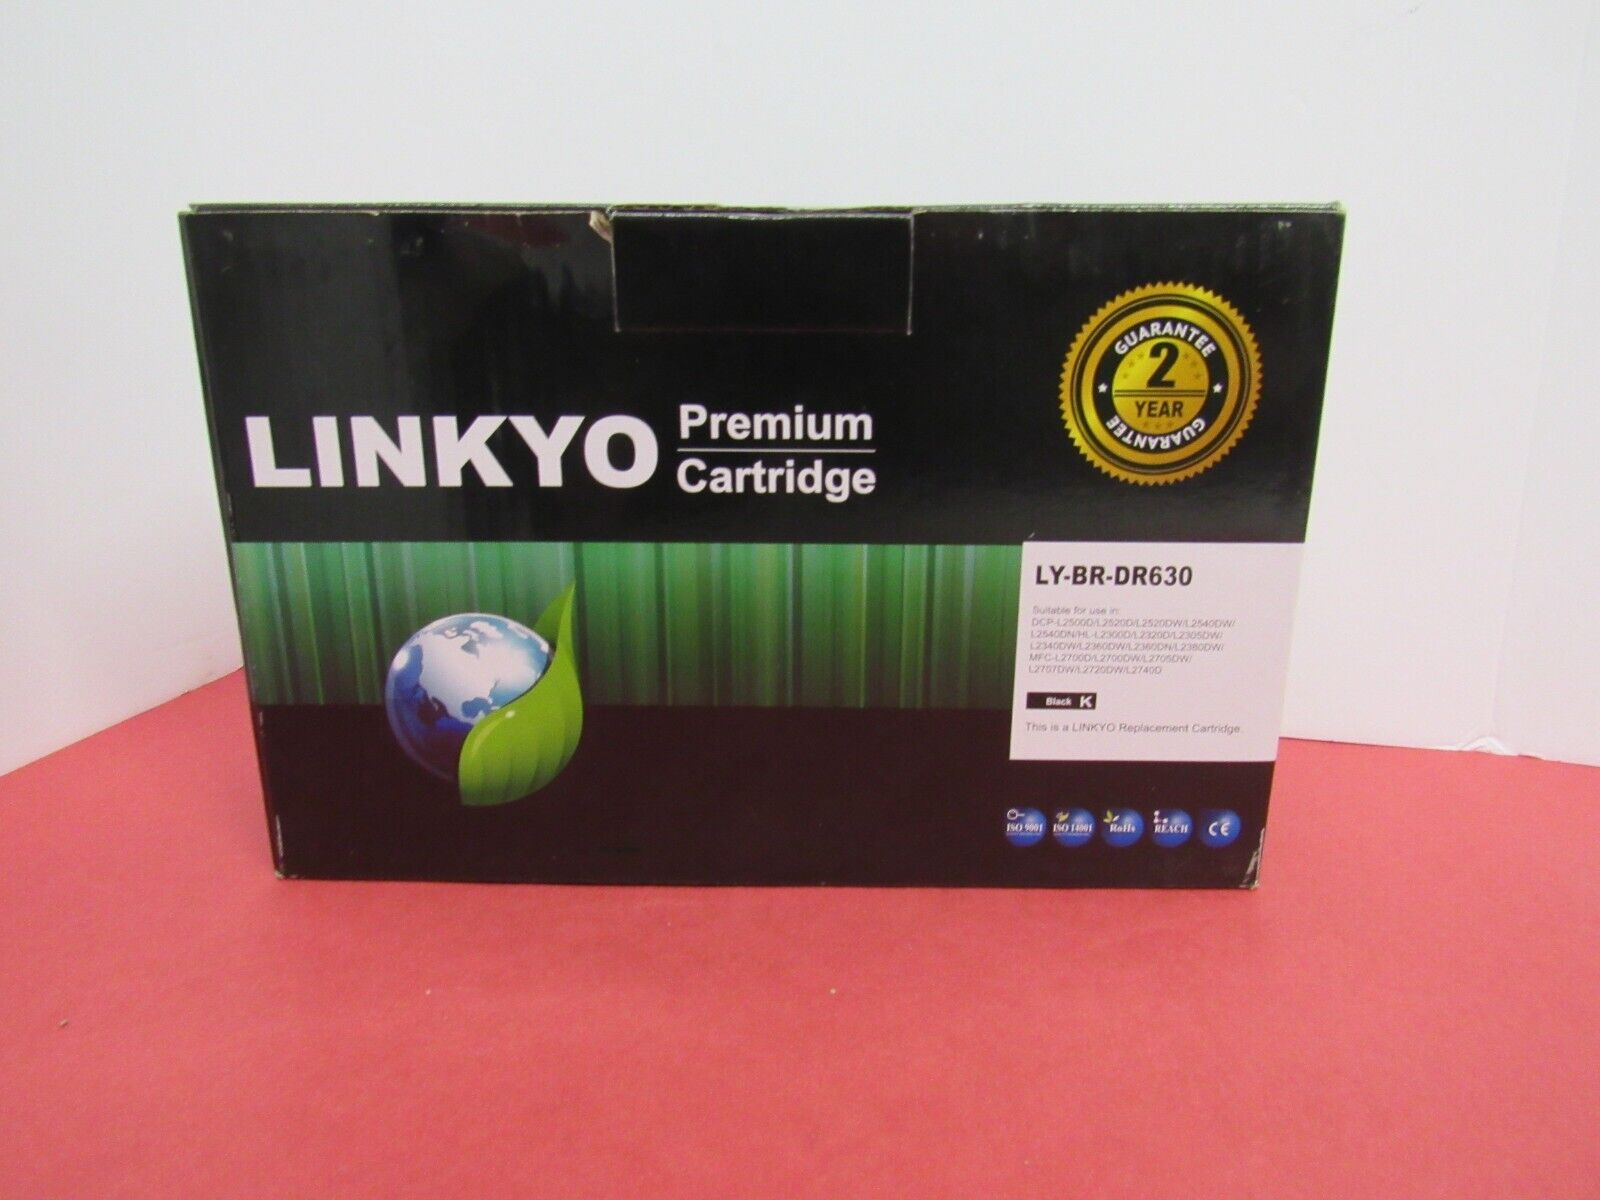 LINKYO Premium Cartridge LY-BR-DR630, Replacement drum unit for Brother DR630 